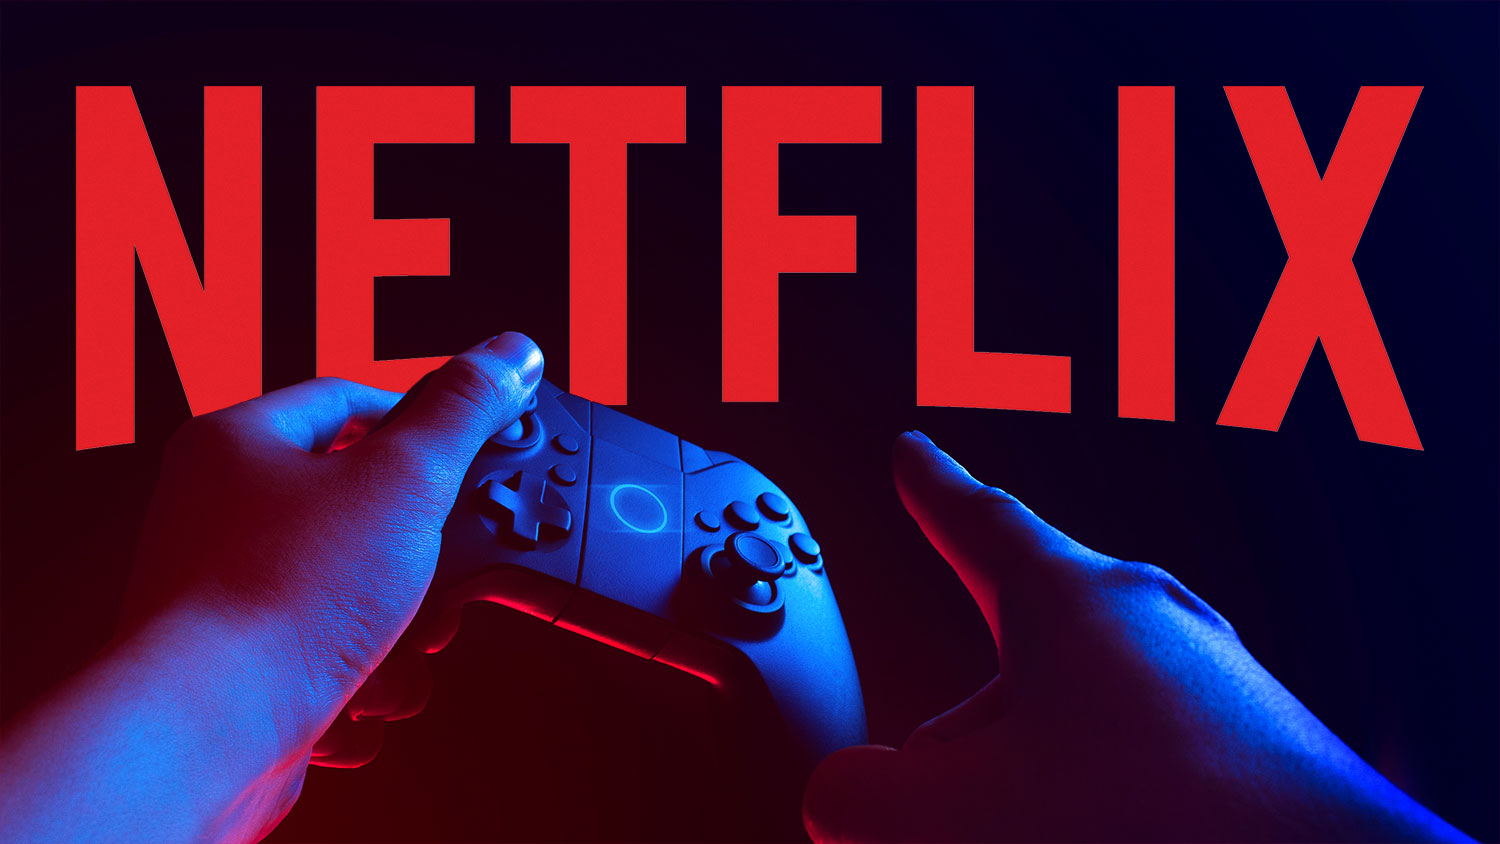 Why is Netflix getting into Games?